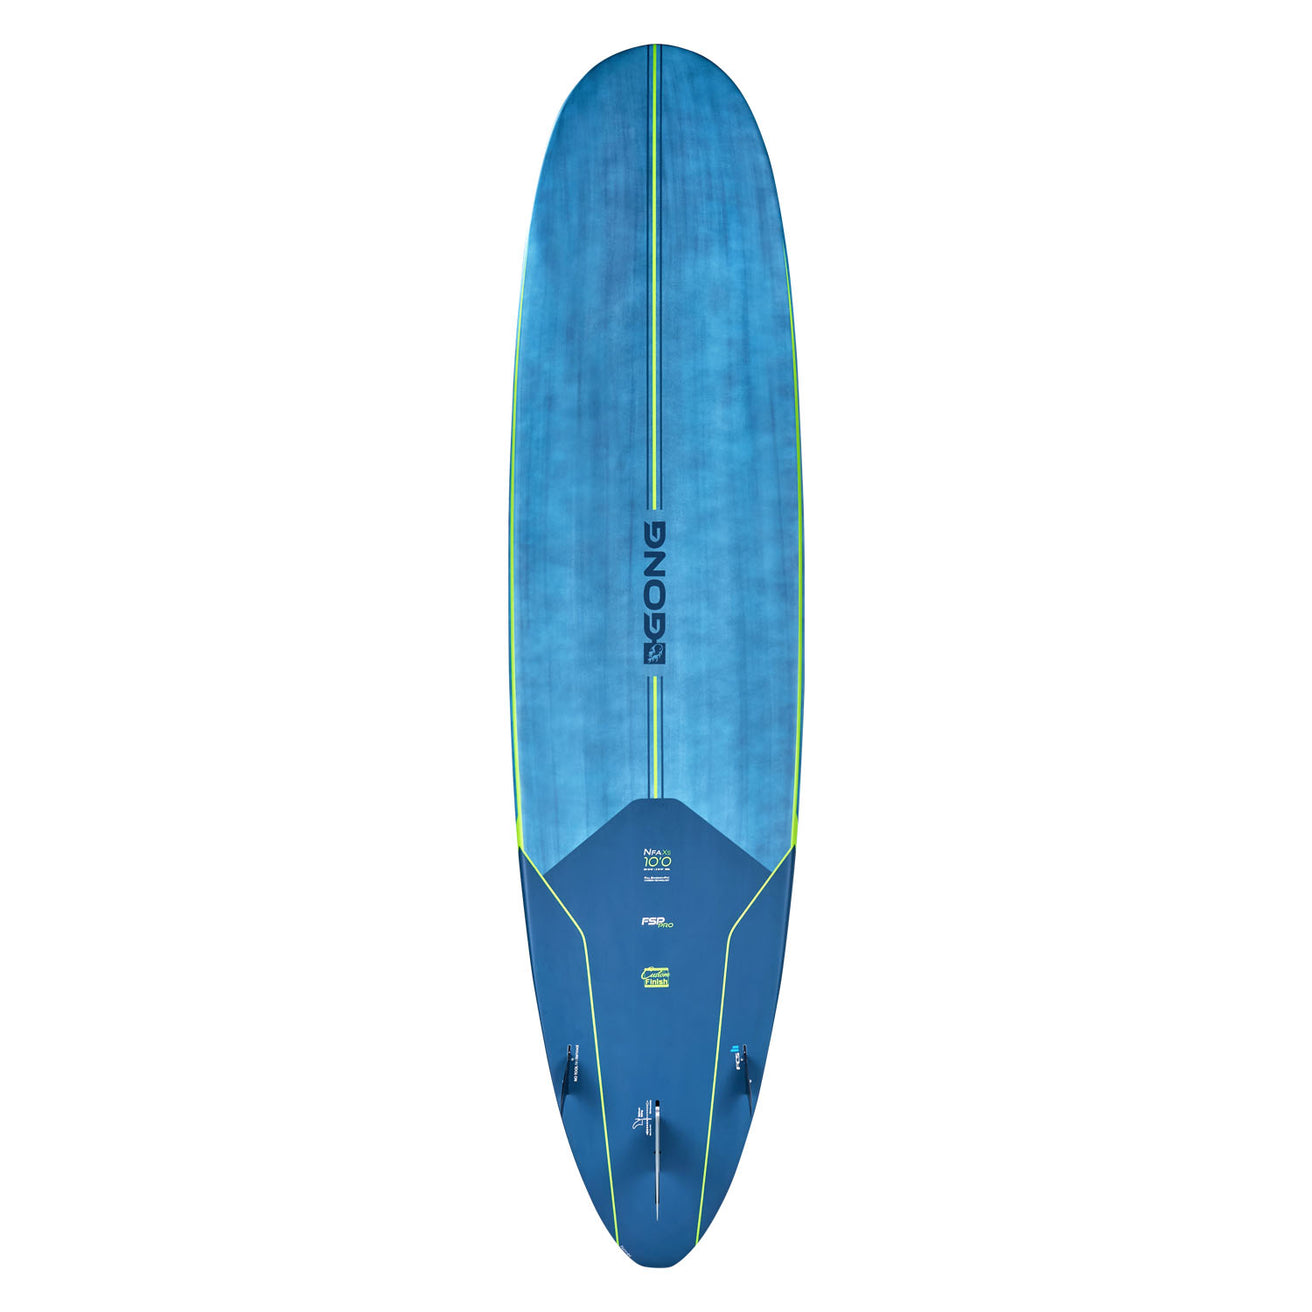 GONG | SUP NFA FSP Pro